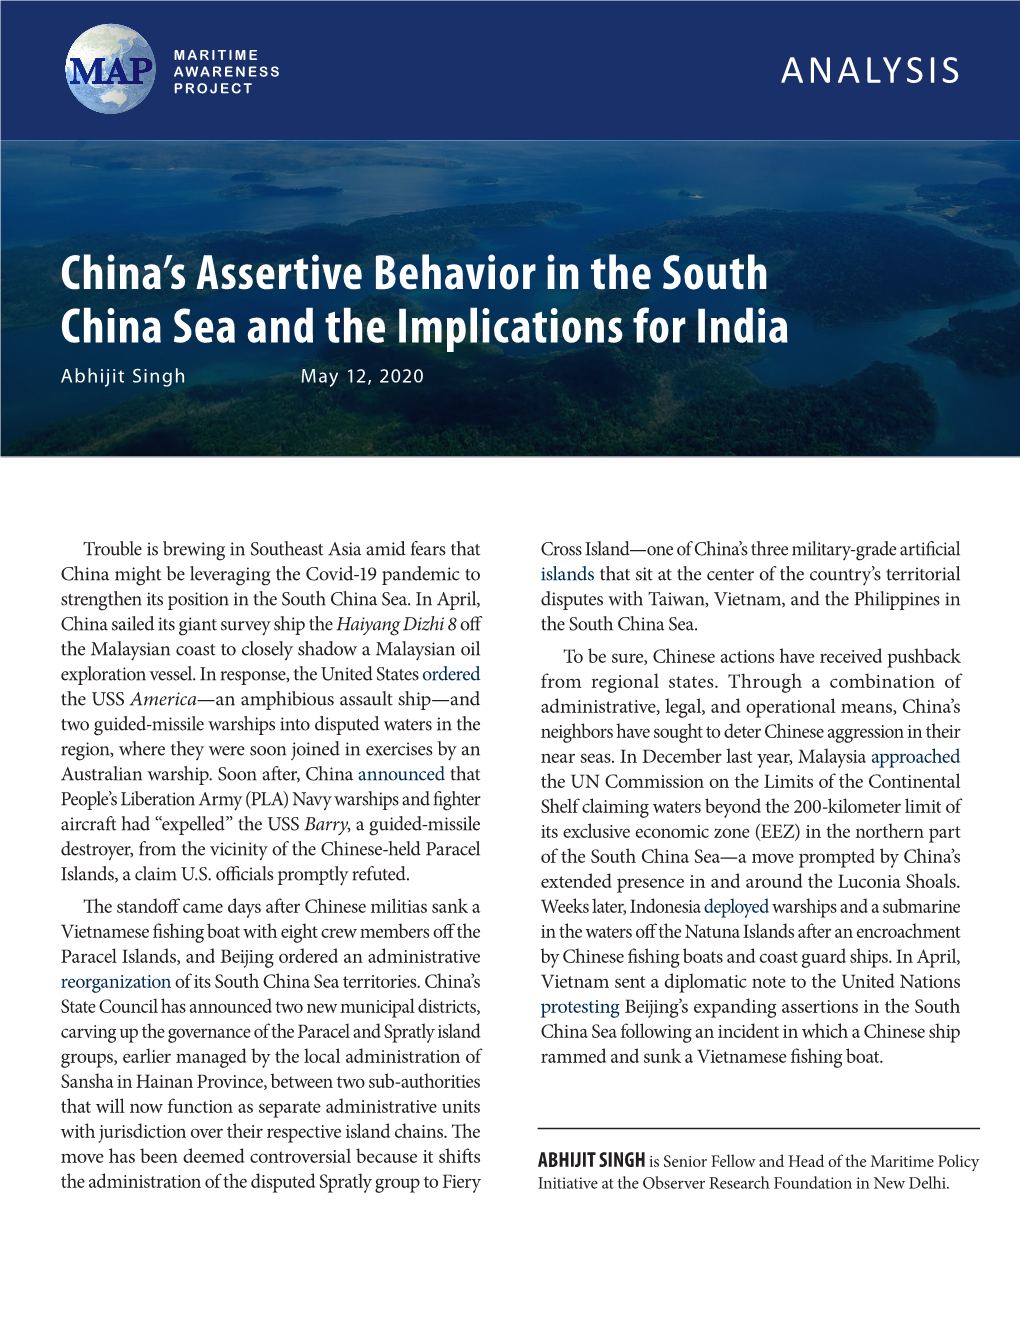 China's Assertive Behavior in the South China Sea and The